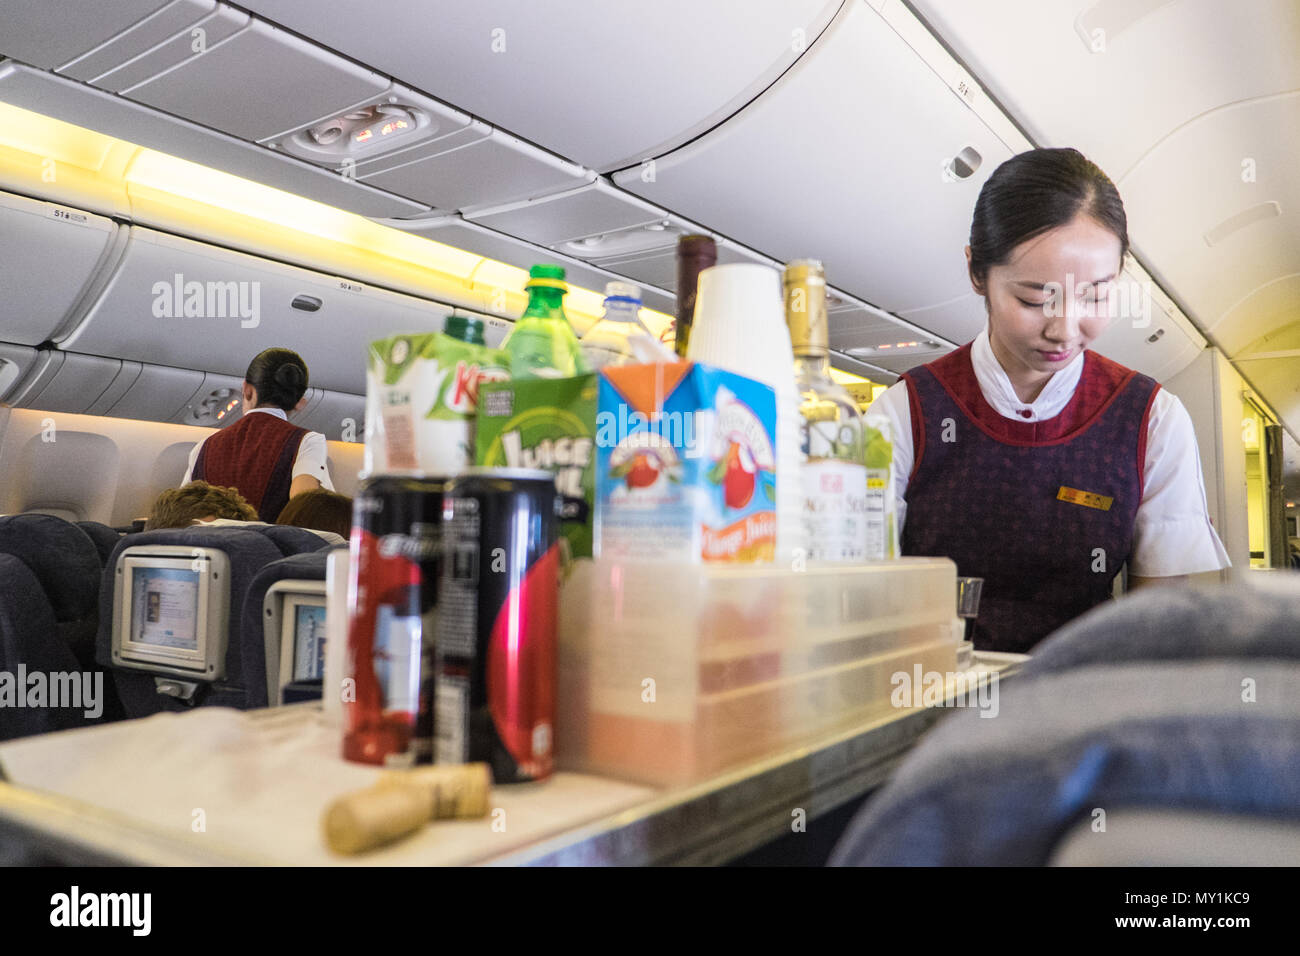 Interior,inside,Air China,flight,airline,stewardess,flight,cabin,crew,serving,service,drinks,food,on,flight,from,Beijing,Asia,Asian,to,London,Europe. Stock Photo